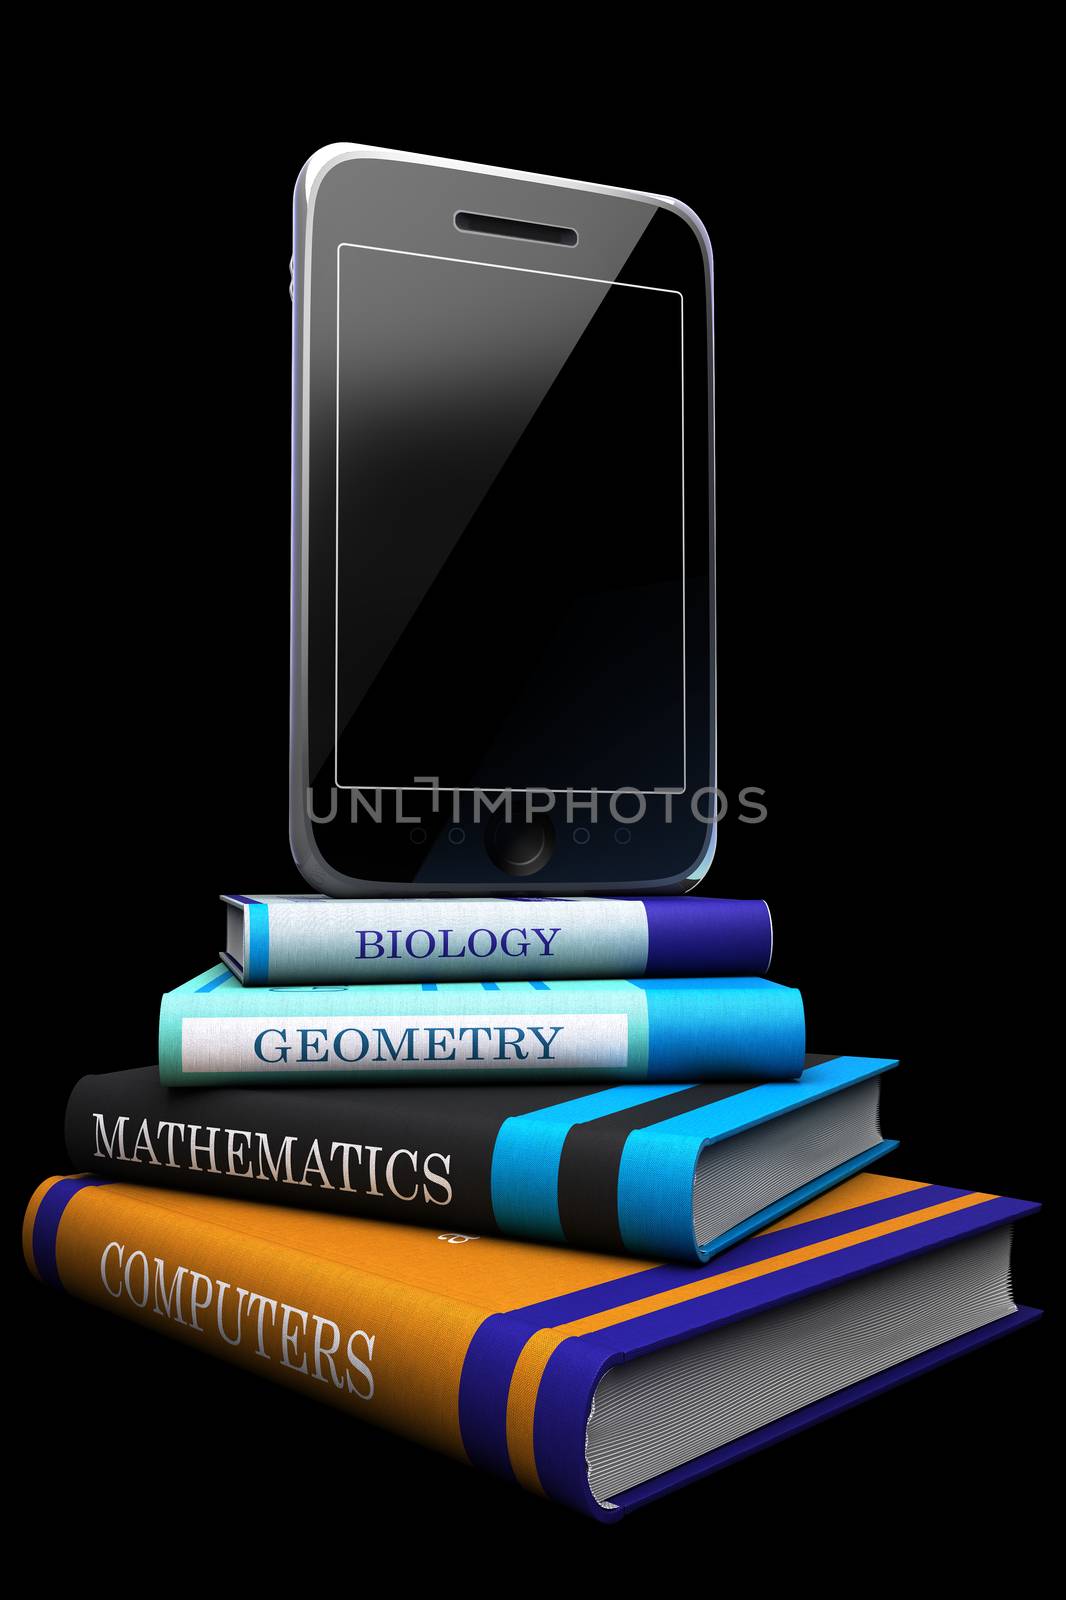 Digital tablet and books as progress concept by denisgo